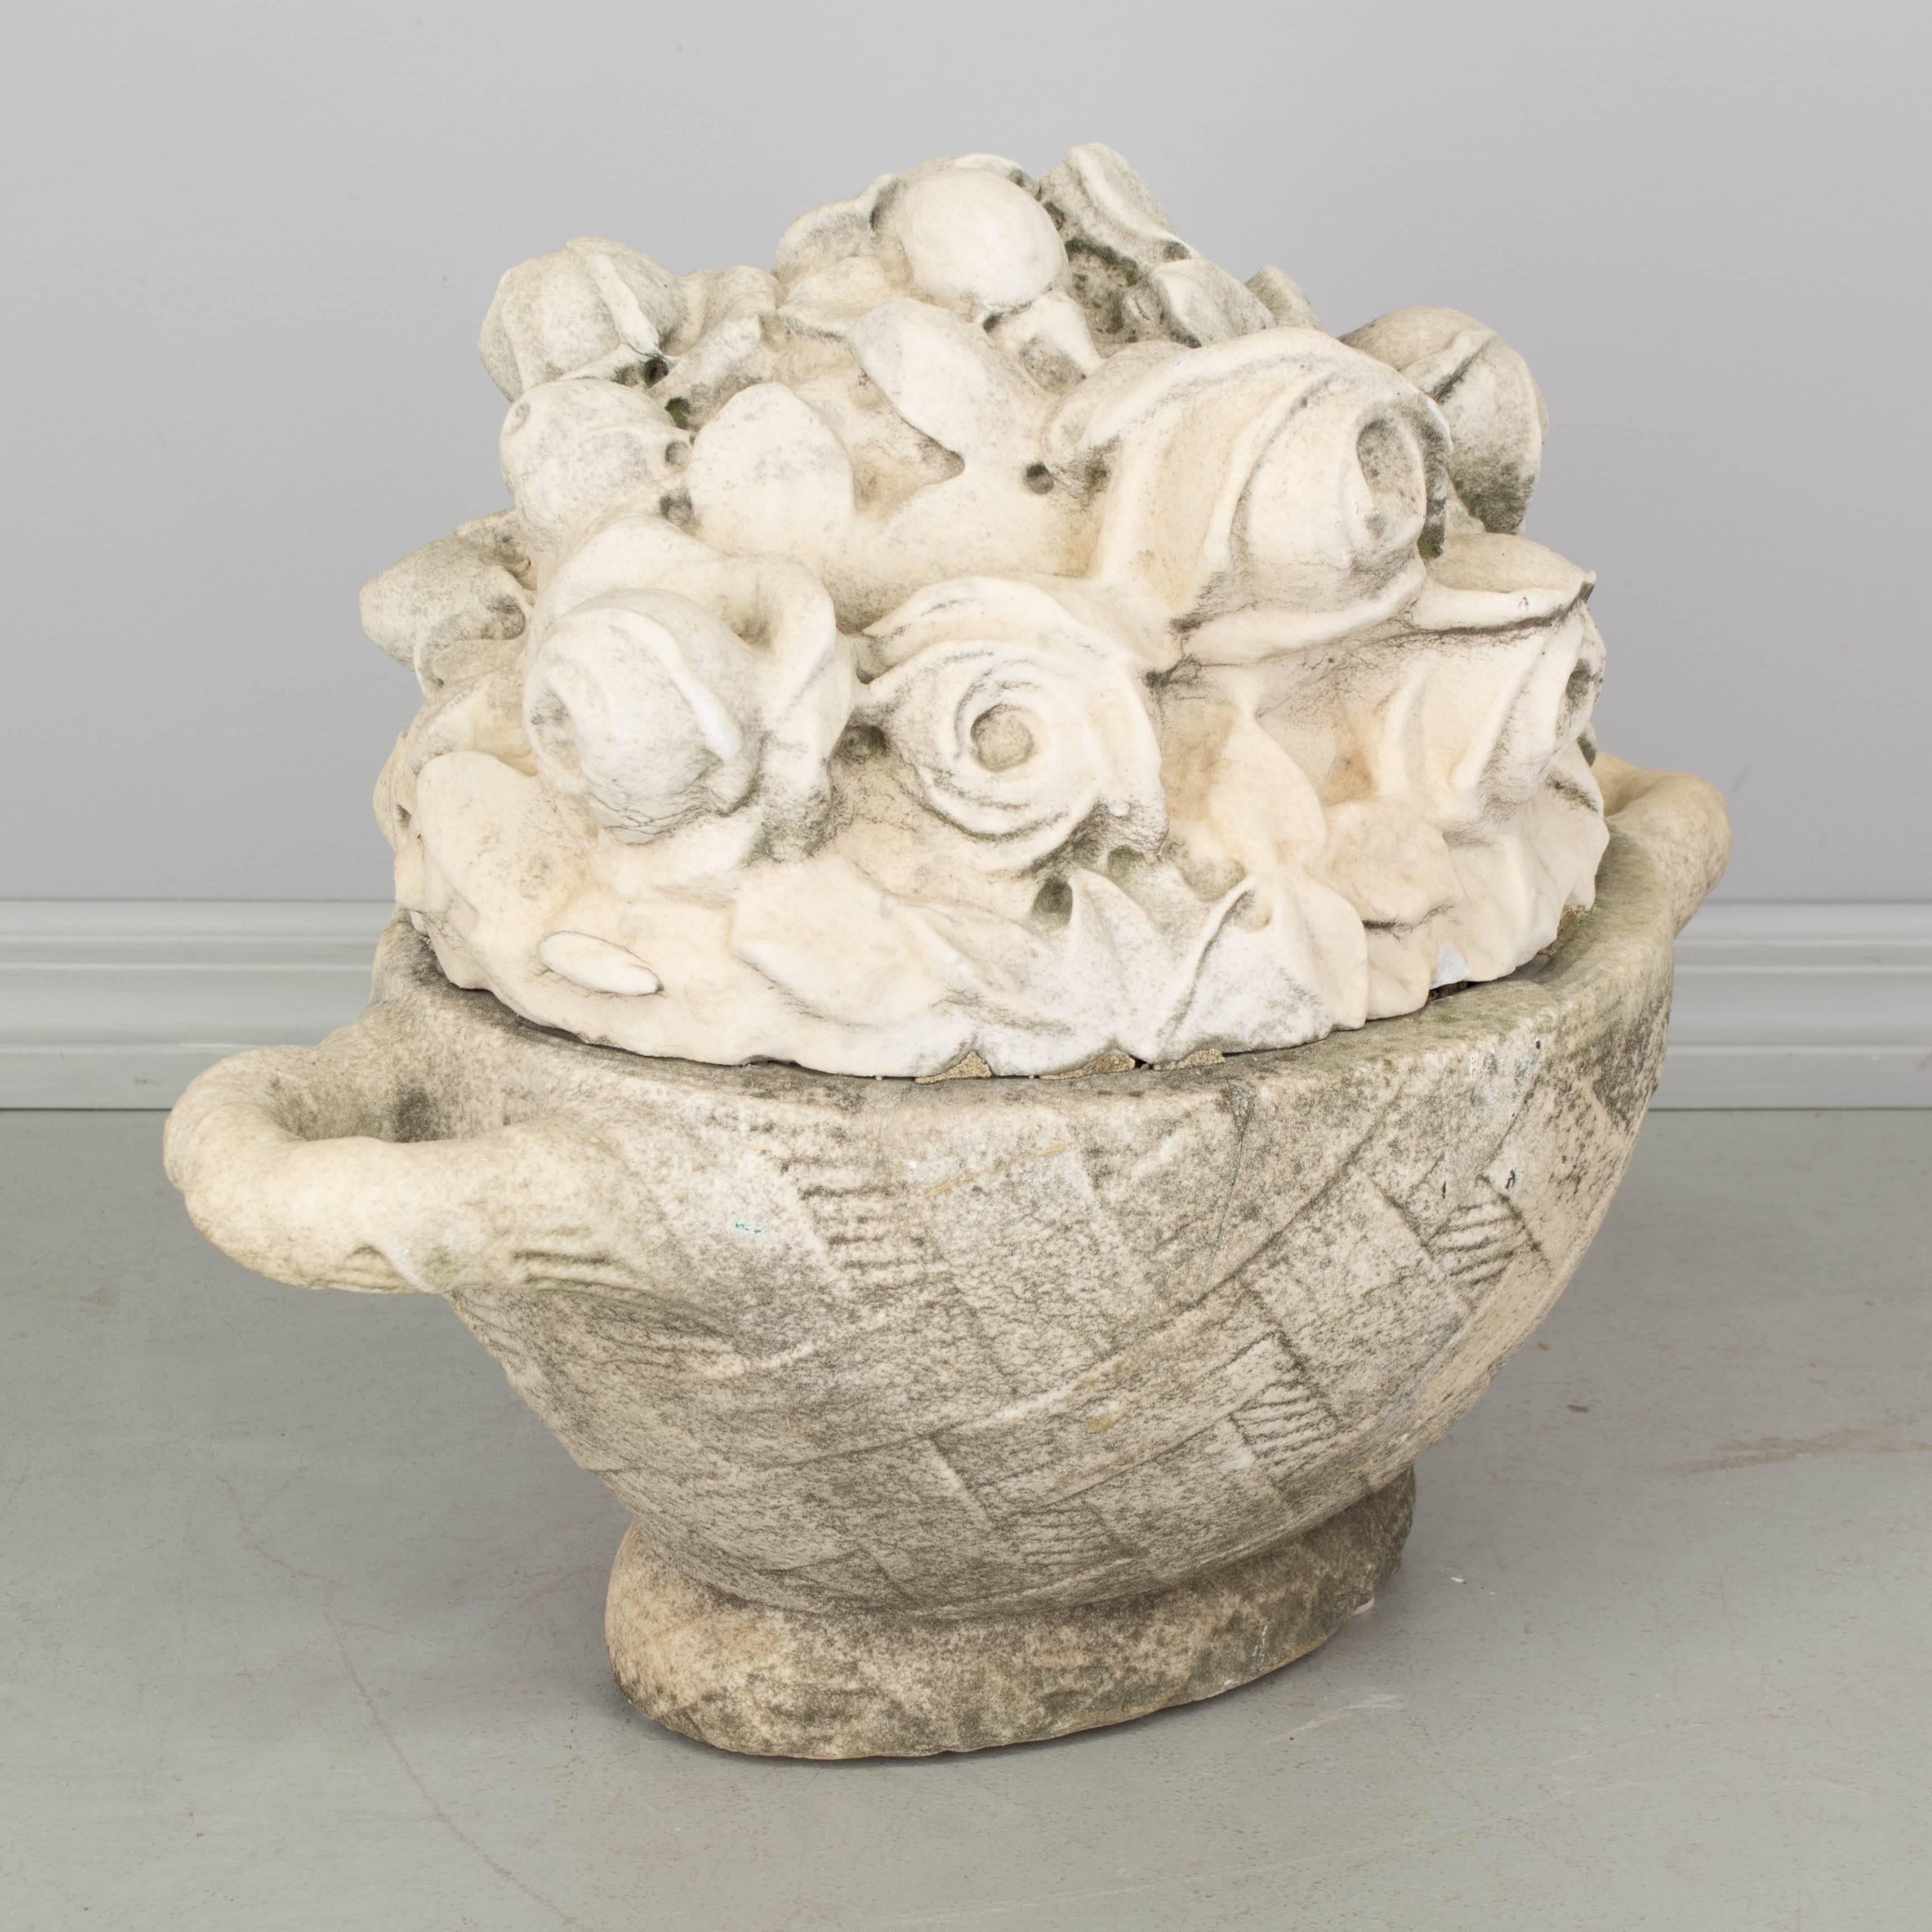 A lovely French marble flower basket garden ornament with nice old mossy patina.
More photos available upon request. We have a large selection of French antiques. Please visit our showroom in Winter Park, Florida.